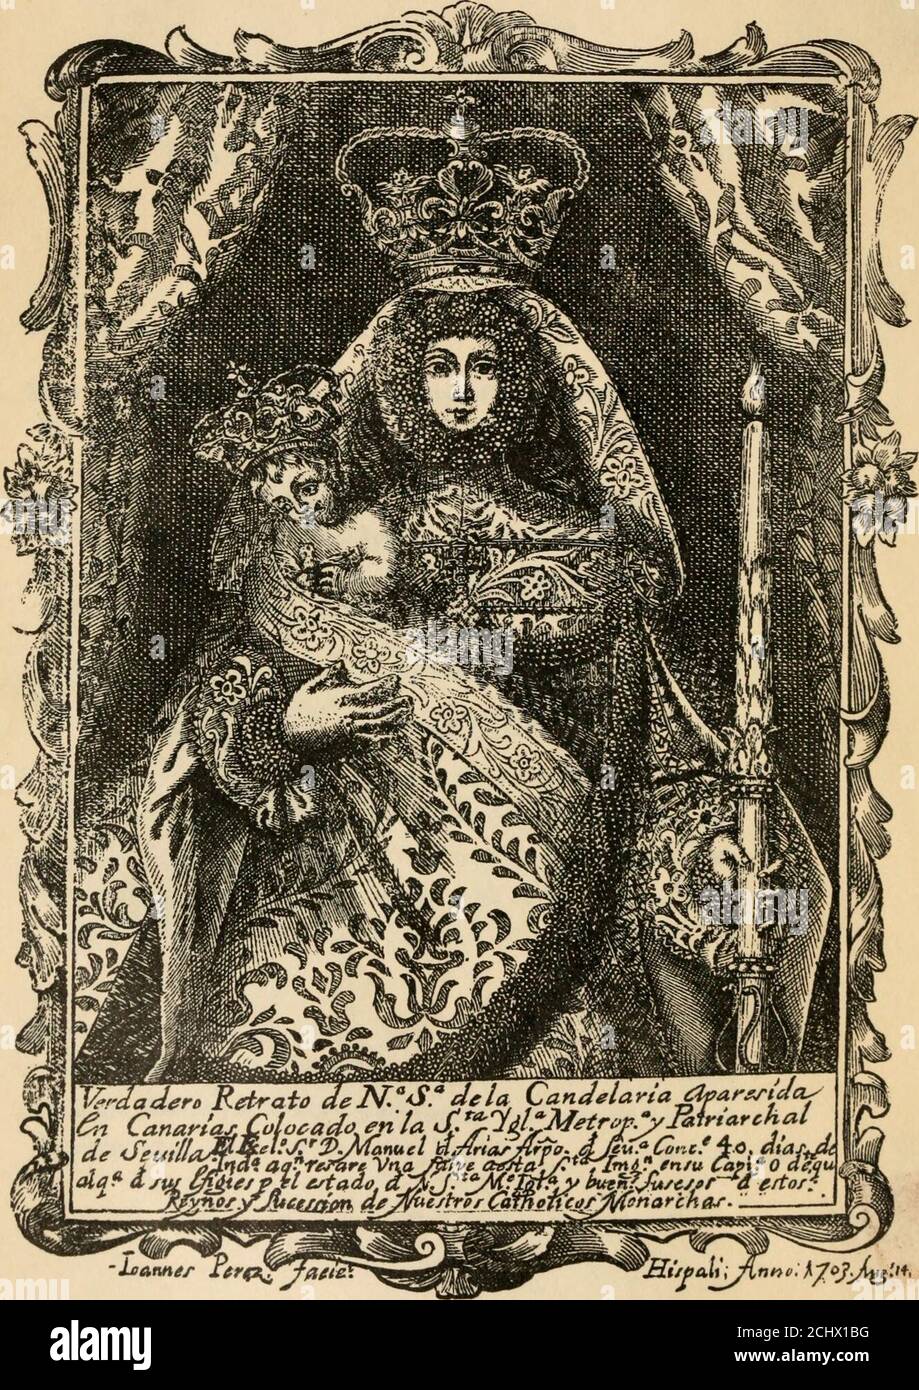 The Guanches of Tenerife, the holy image of Our Lady of Candelaria, and the  Spanish conquest and settlement . Series II. Vol. XXI.. -inanney  ícrtpi^^fletSí PORTRAIT OF OUR LADY OF CANDELARIA,BY